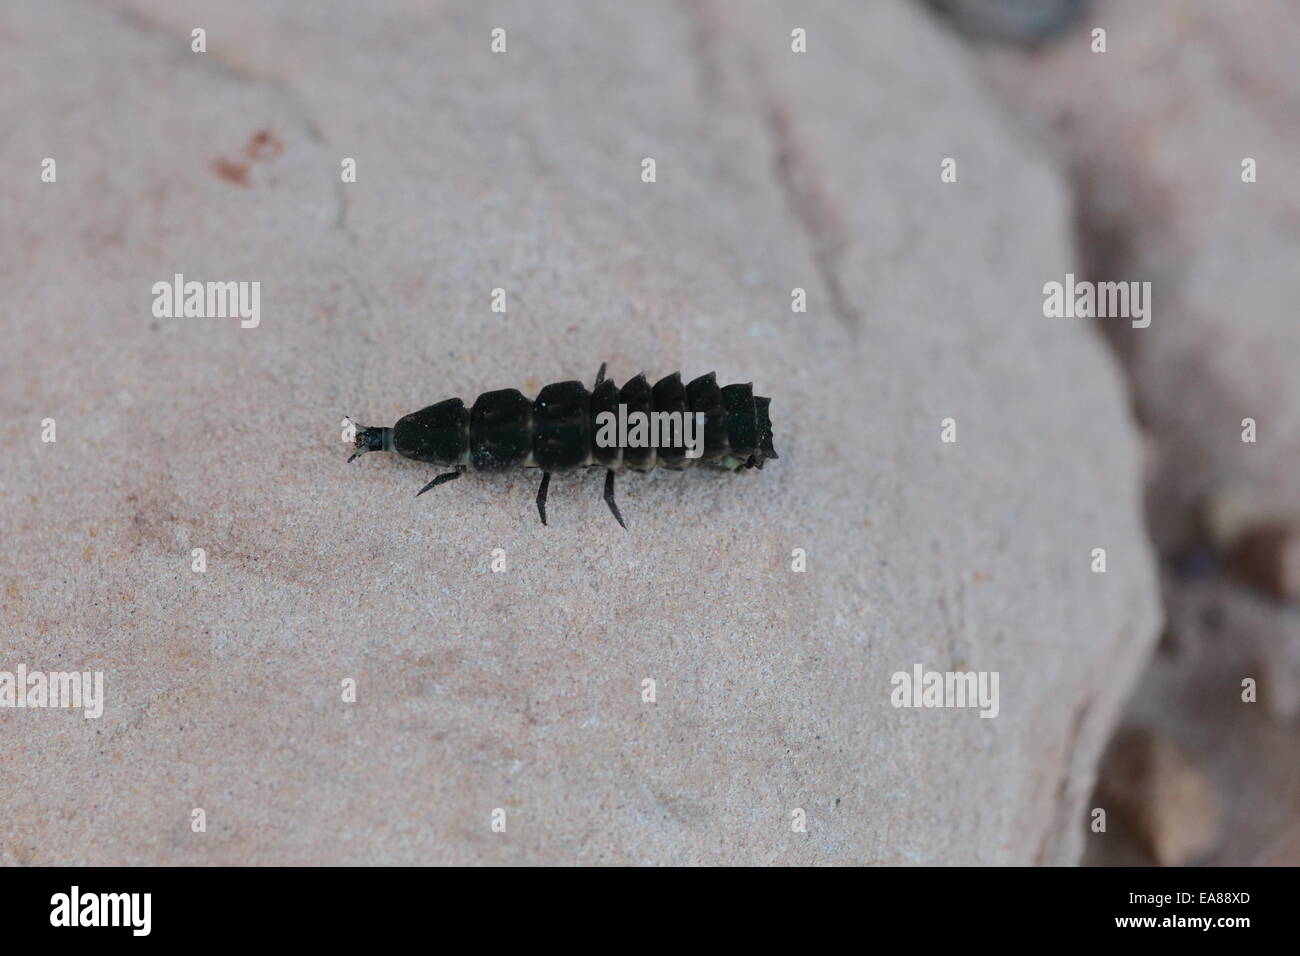 Long segmented insect on slopes of Table Mountain Stock Photo